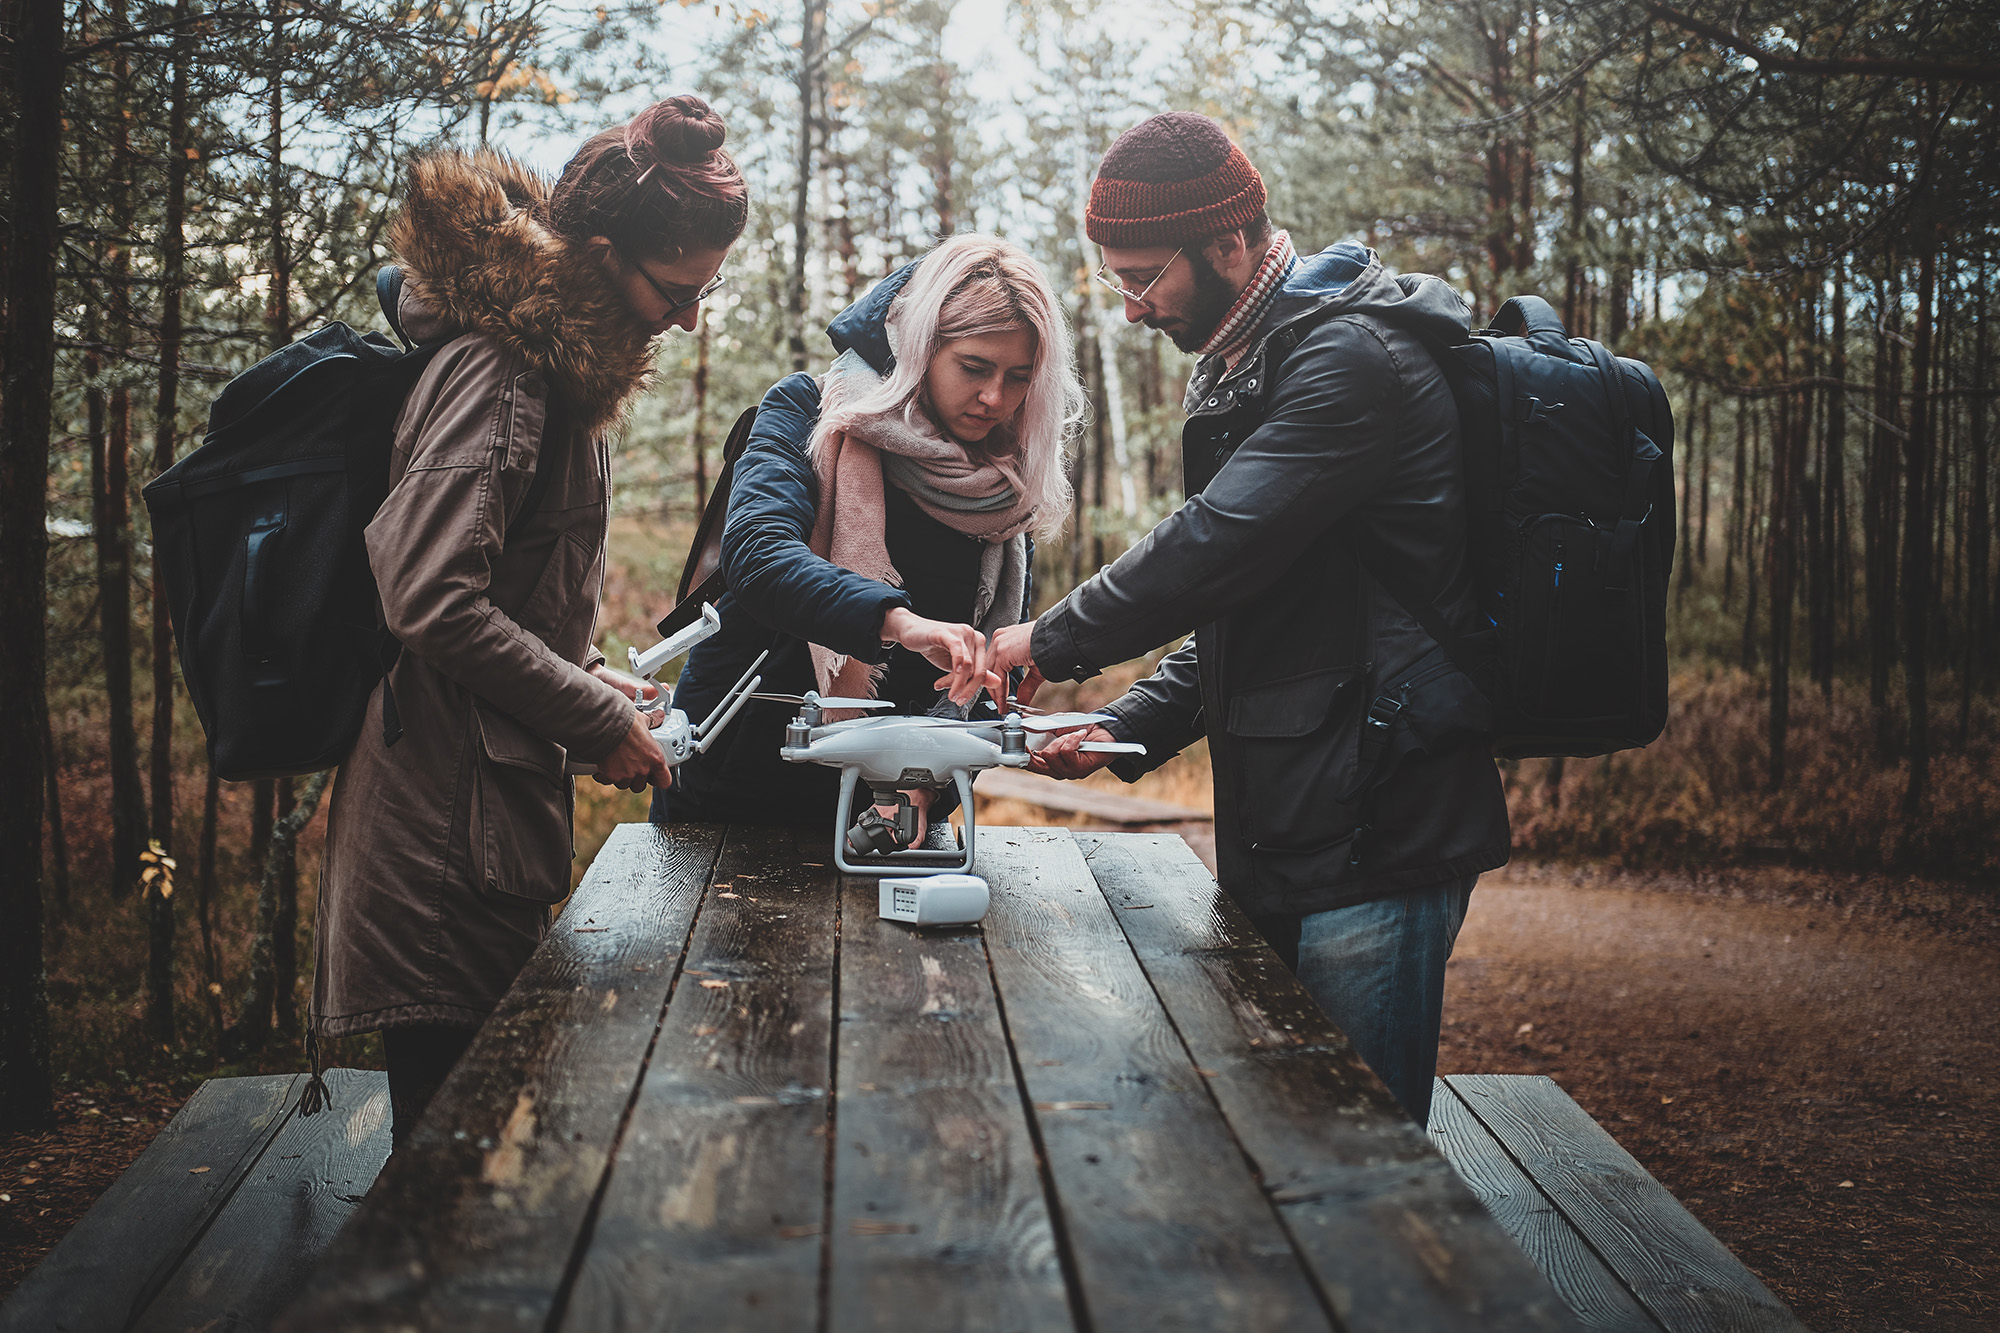 group outdoors assembling a drone